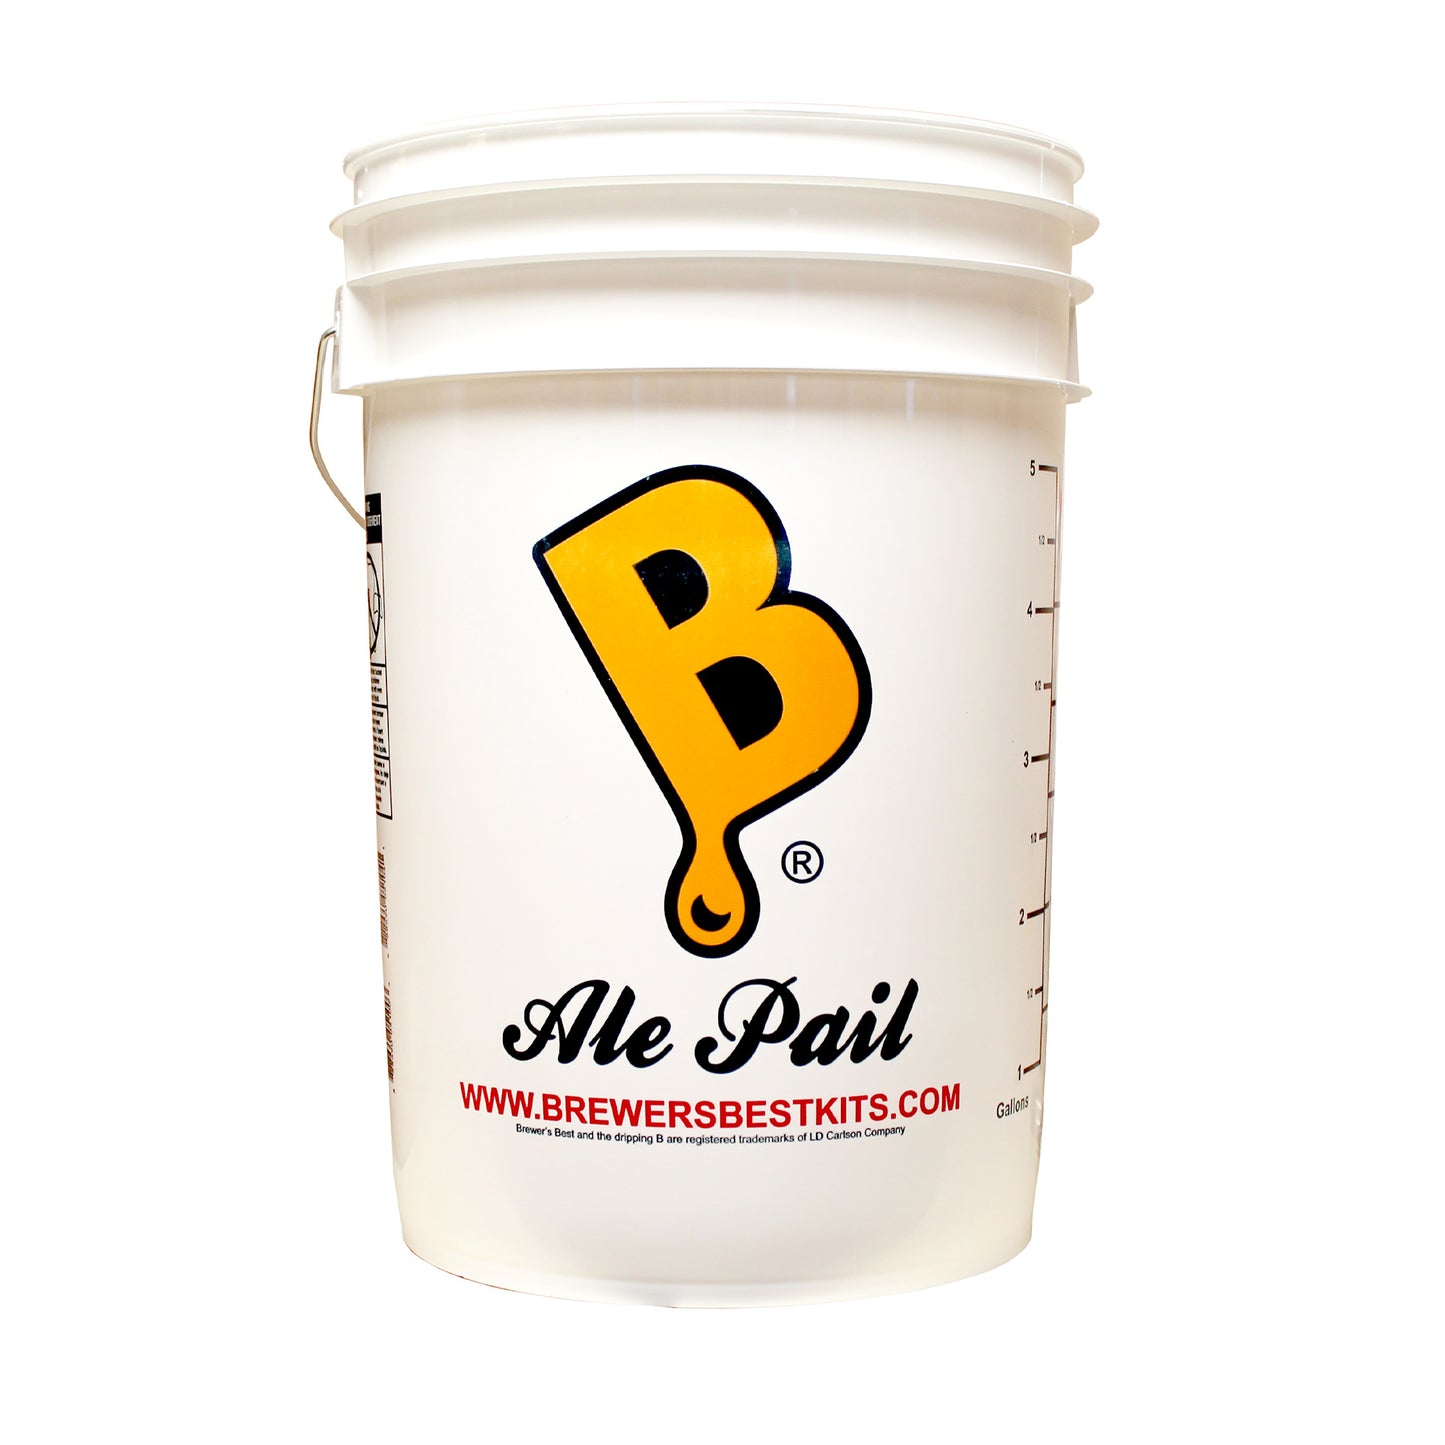 6.5 Gallon Bucket (Ale Pail) For Homebrewing